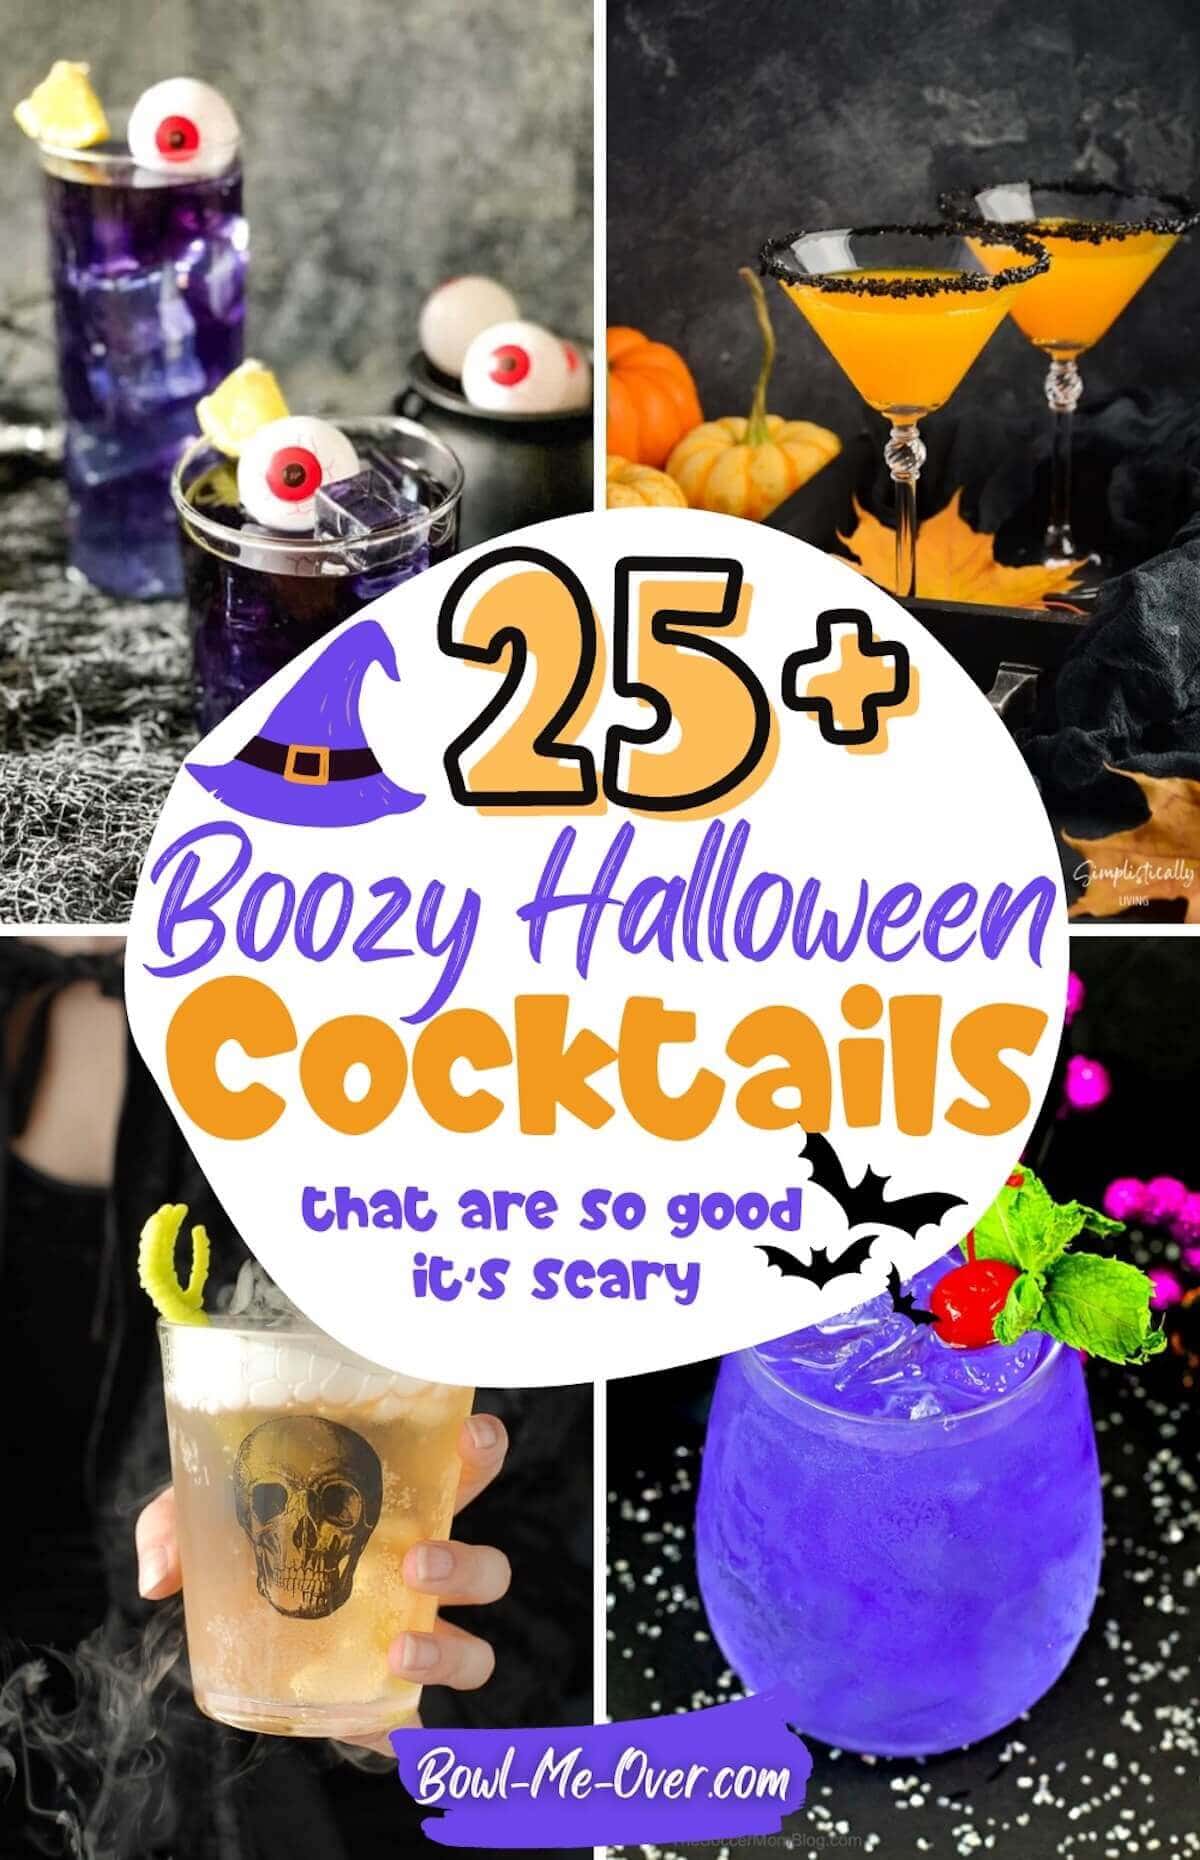 Collage of Halloween Cocktail photos with print overlay for social media.